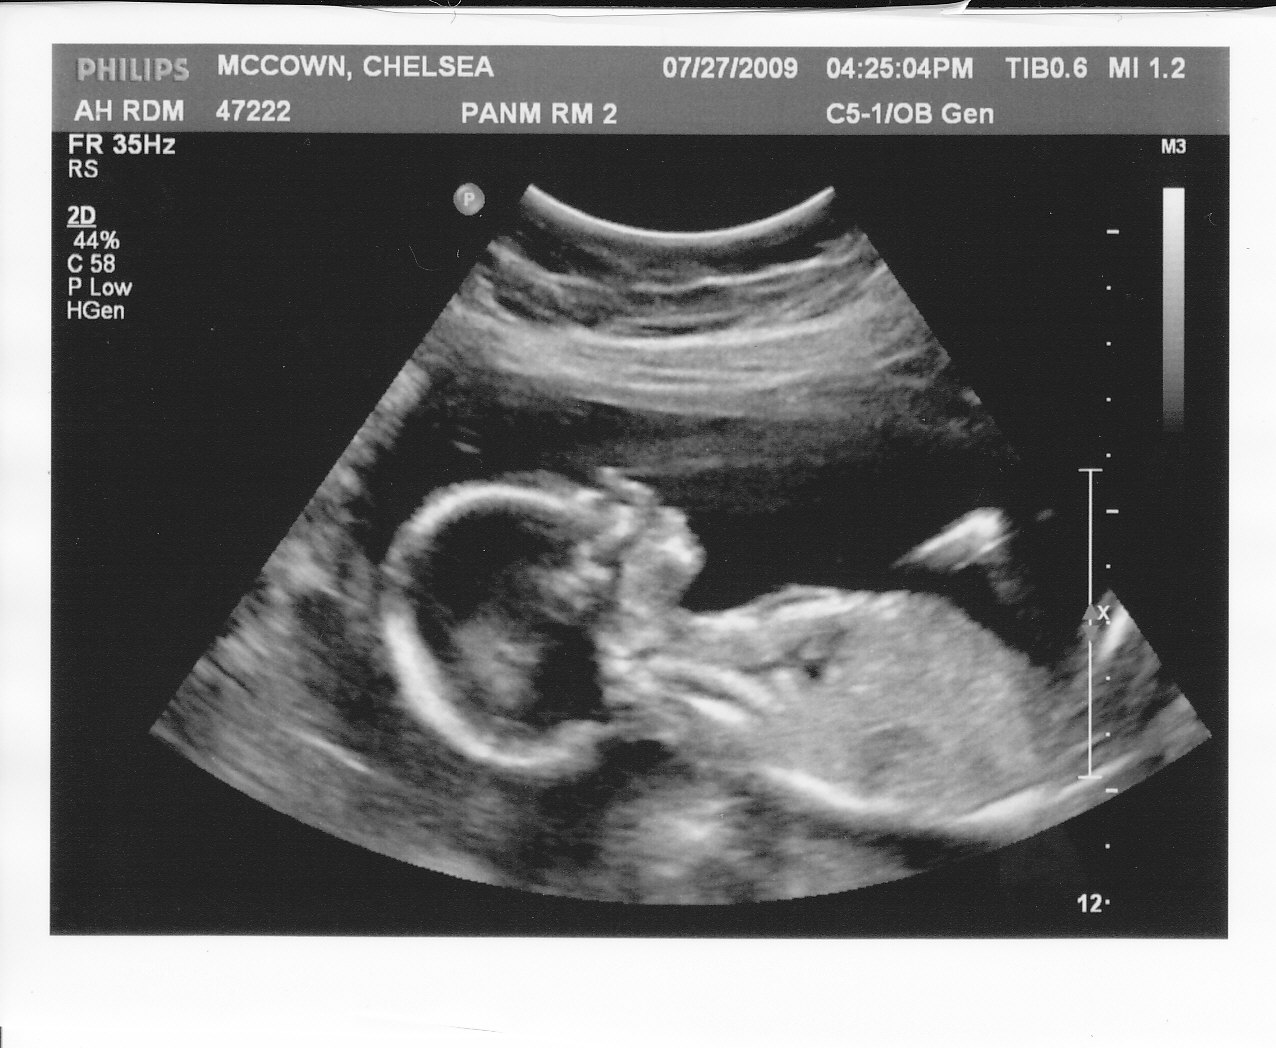 ultrasound at 2 months pregnant